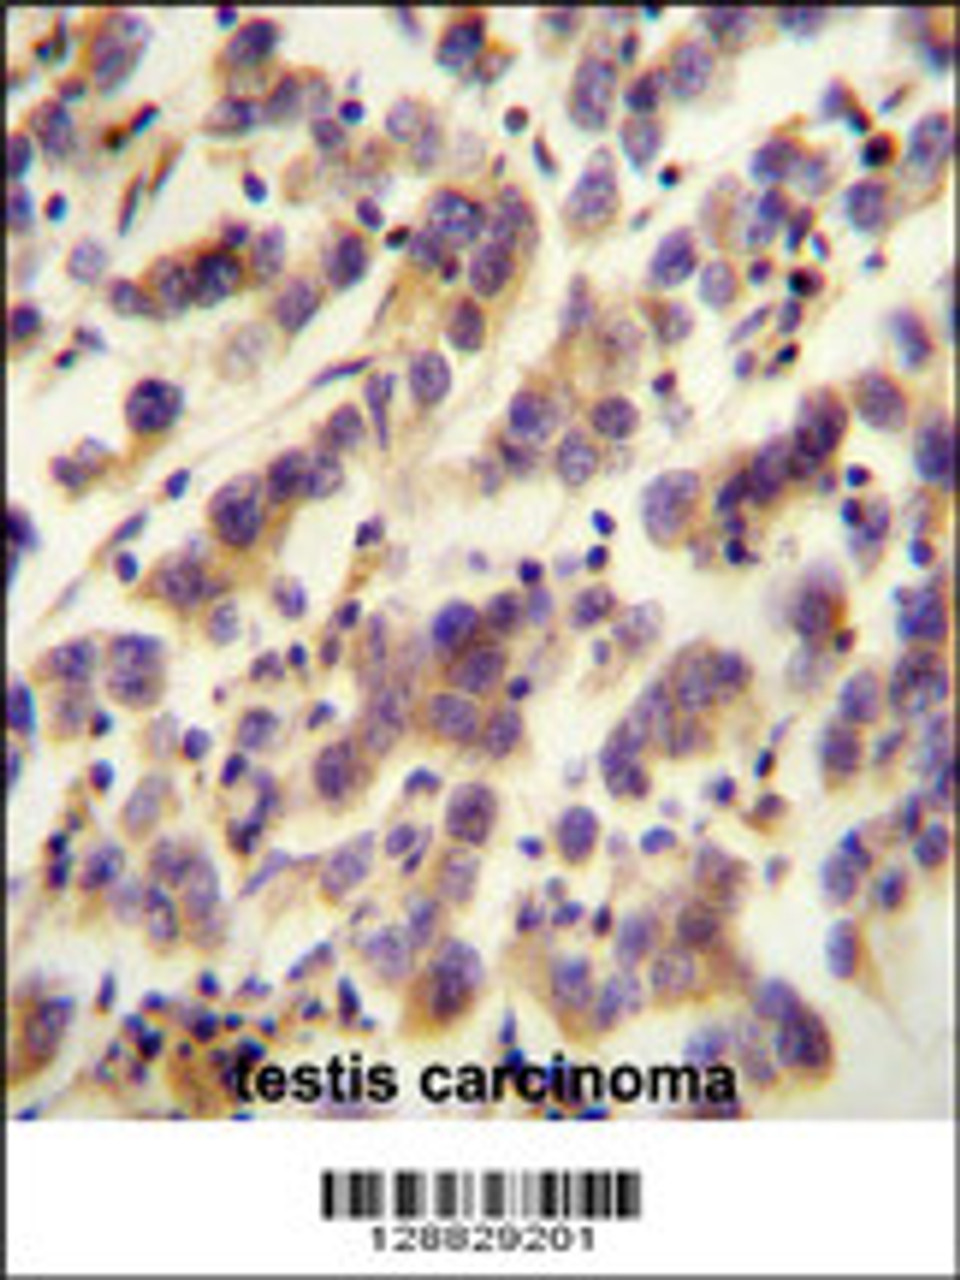 OR1J4 antibody immunohistochemistry analysis in formalin fixed and paraffin embedded human testis carcinoma followed by peroxidase conjugation of the secondary antibody and DAB staining.